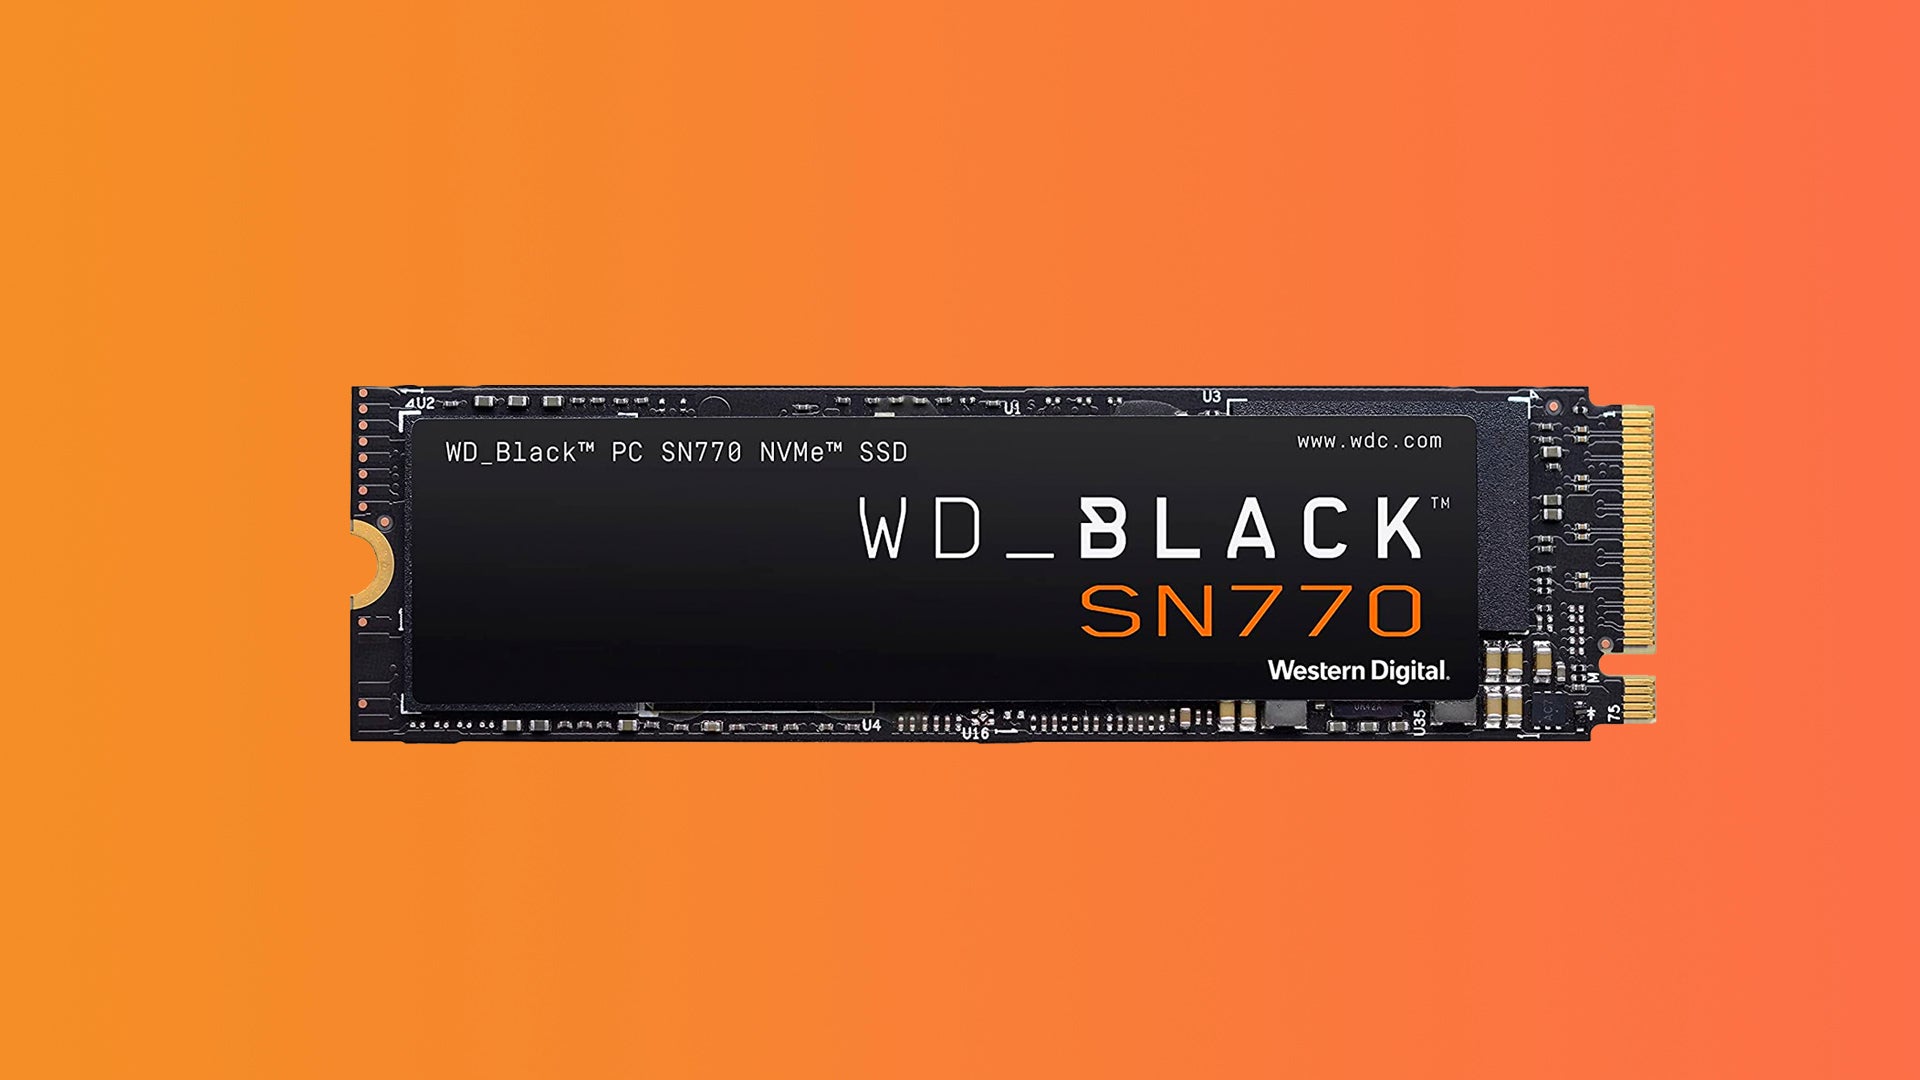 Image for Add 1TB of storage to your PC for less with this WD Black SN770 SSD deal from Amazon